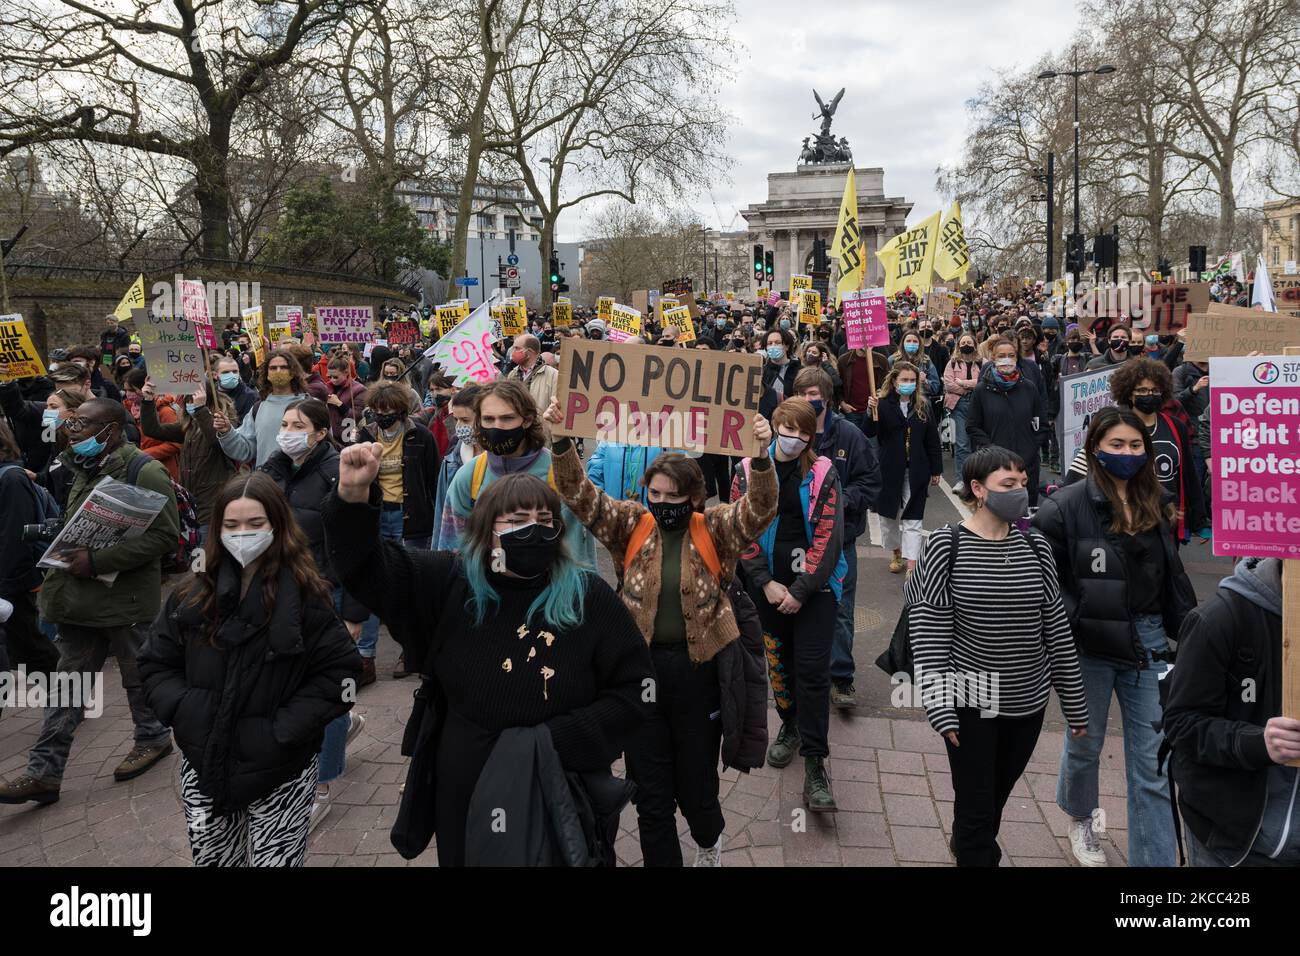 LONDON, UNITED KINGDOM - APRIL 03, 2021: Demonstrators march through central London in a protest against government’s Police, Crime, Sentencing and Courts Bill, which would give officers and the Home Secretary new powers to impose conditions on protests and public processions, on 03 April, 2021 in London, England. The demonstration is part of a national day of action with protests happening across the UK. (Photo by WIktor Szymanowicz/NurPhoto) Stock Photo